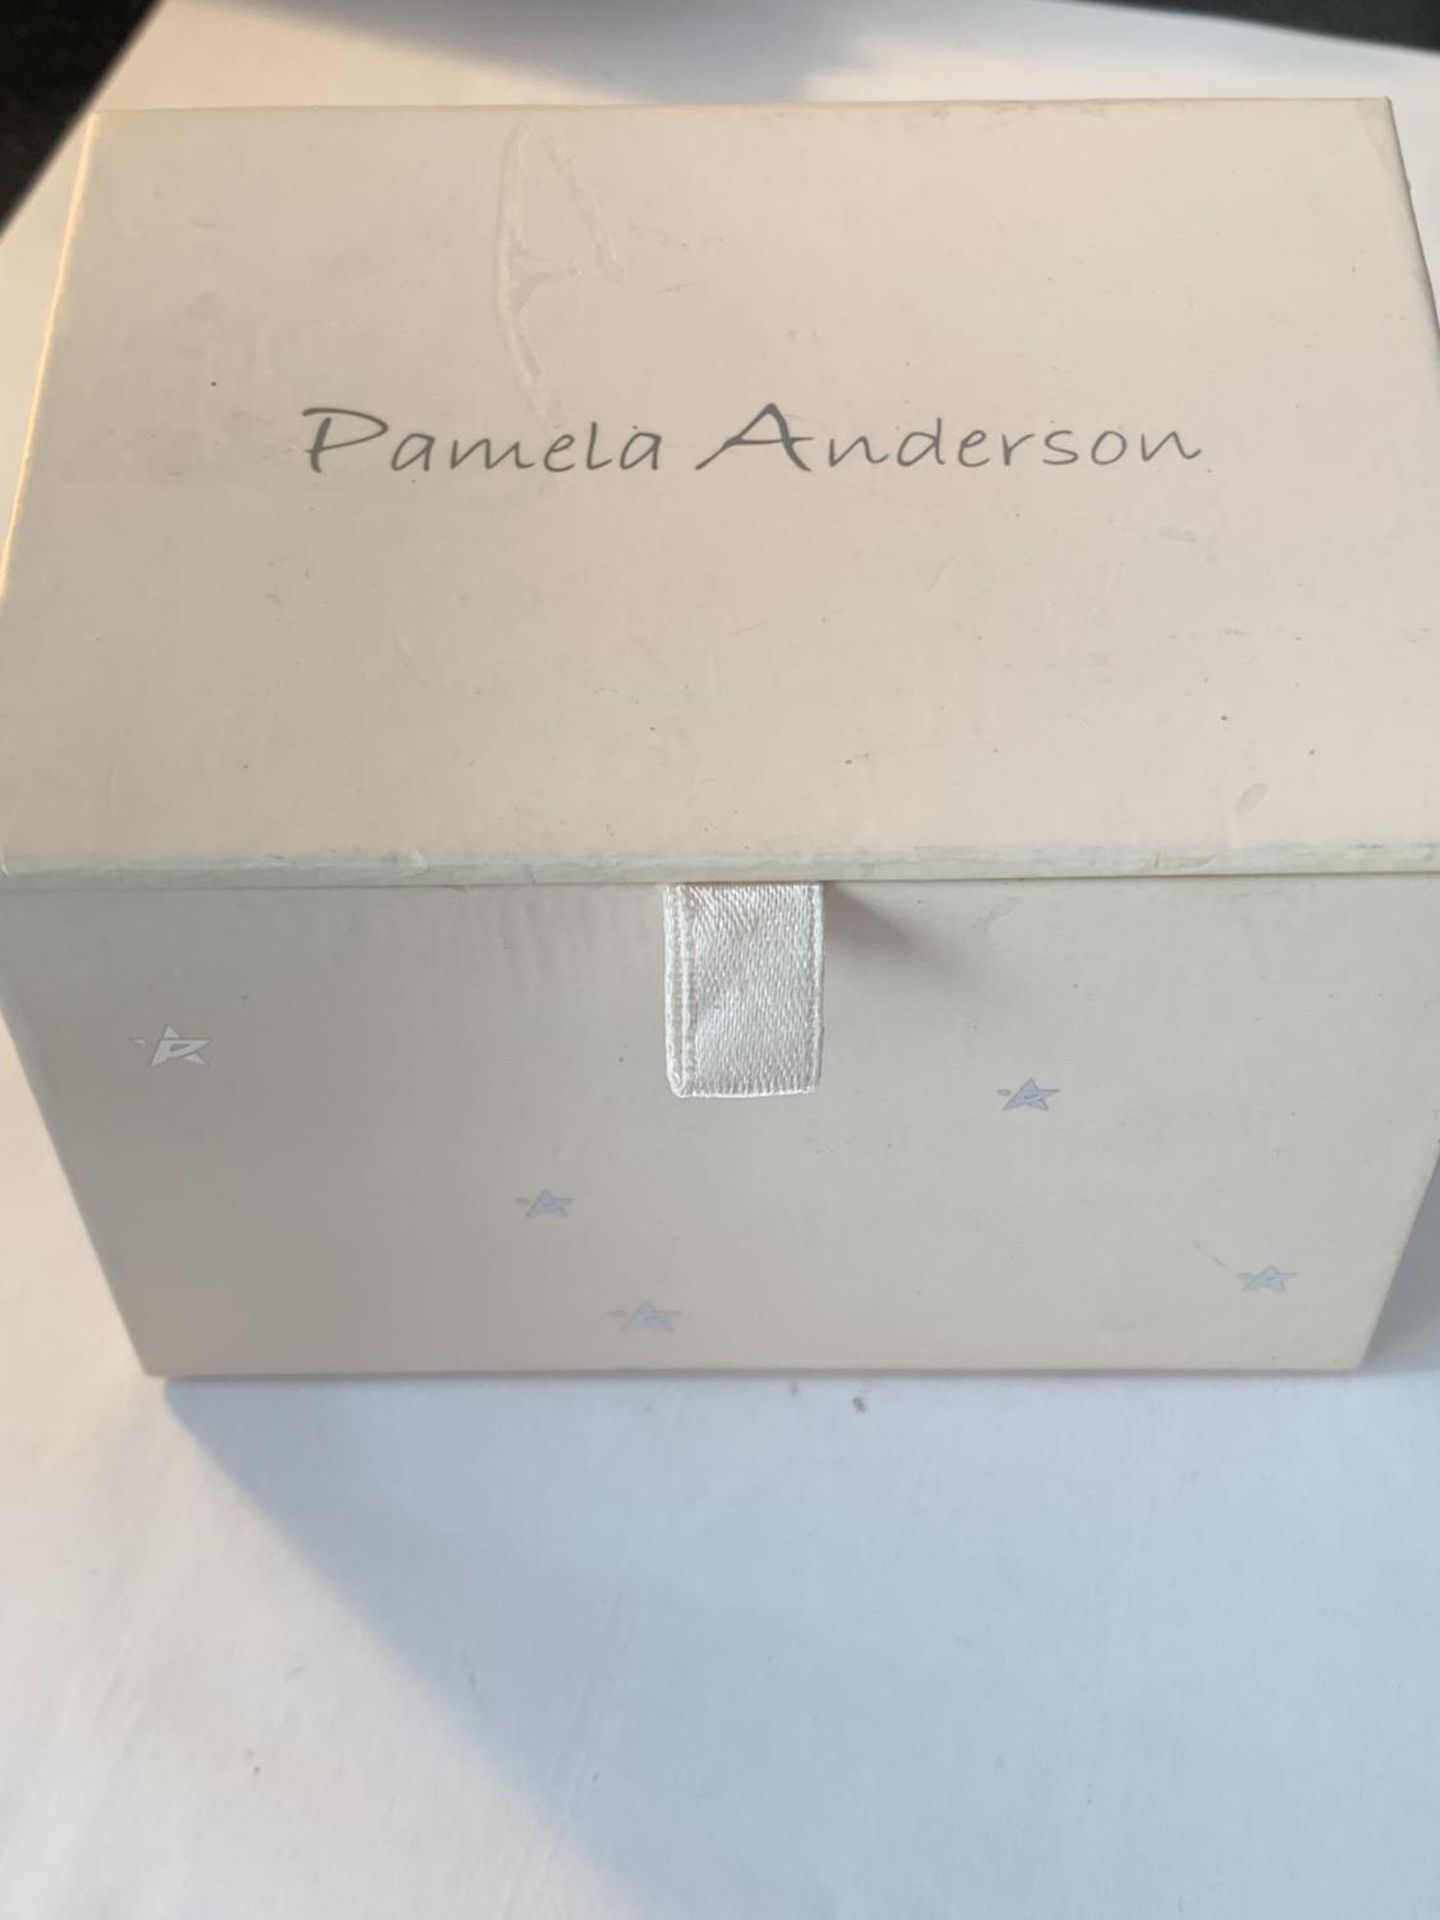 A PAMELA ANDERSON WRISTWATCH IN A PRESENTATION BOX SEEN WORKING BUT NO WARRANTY - Image 2 of 3